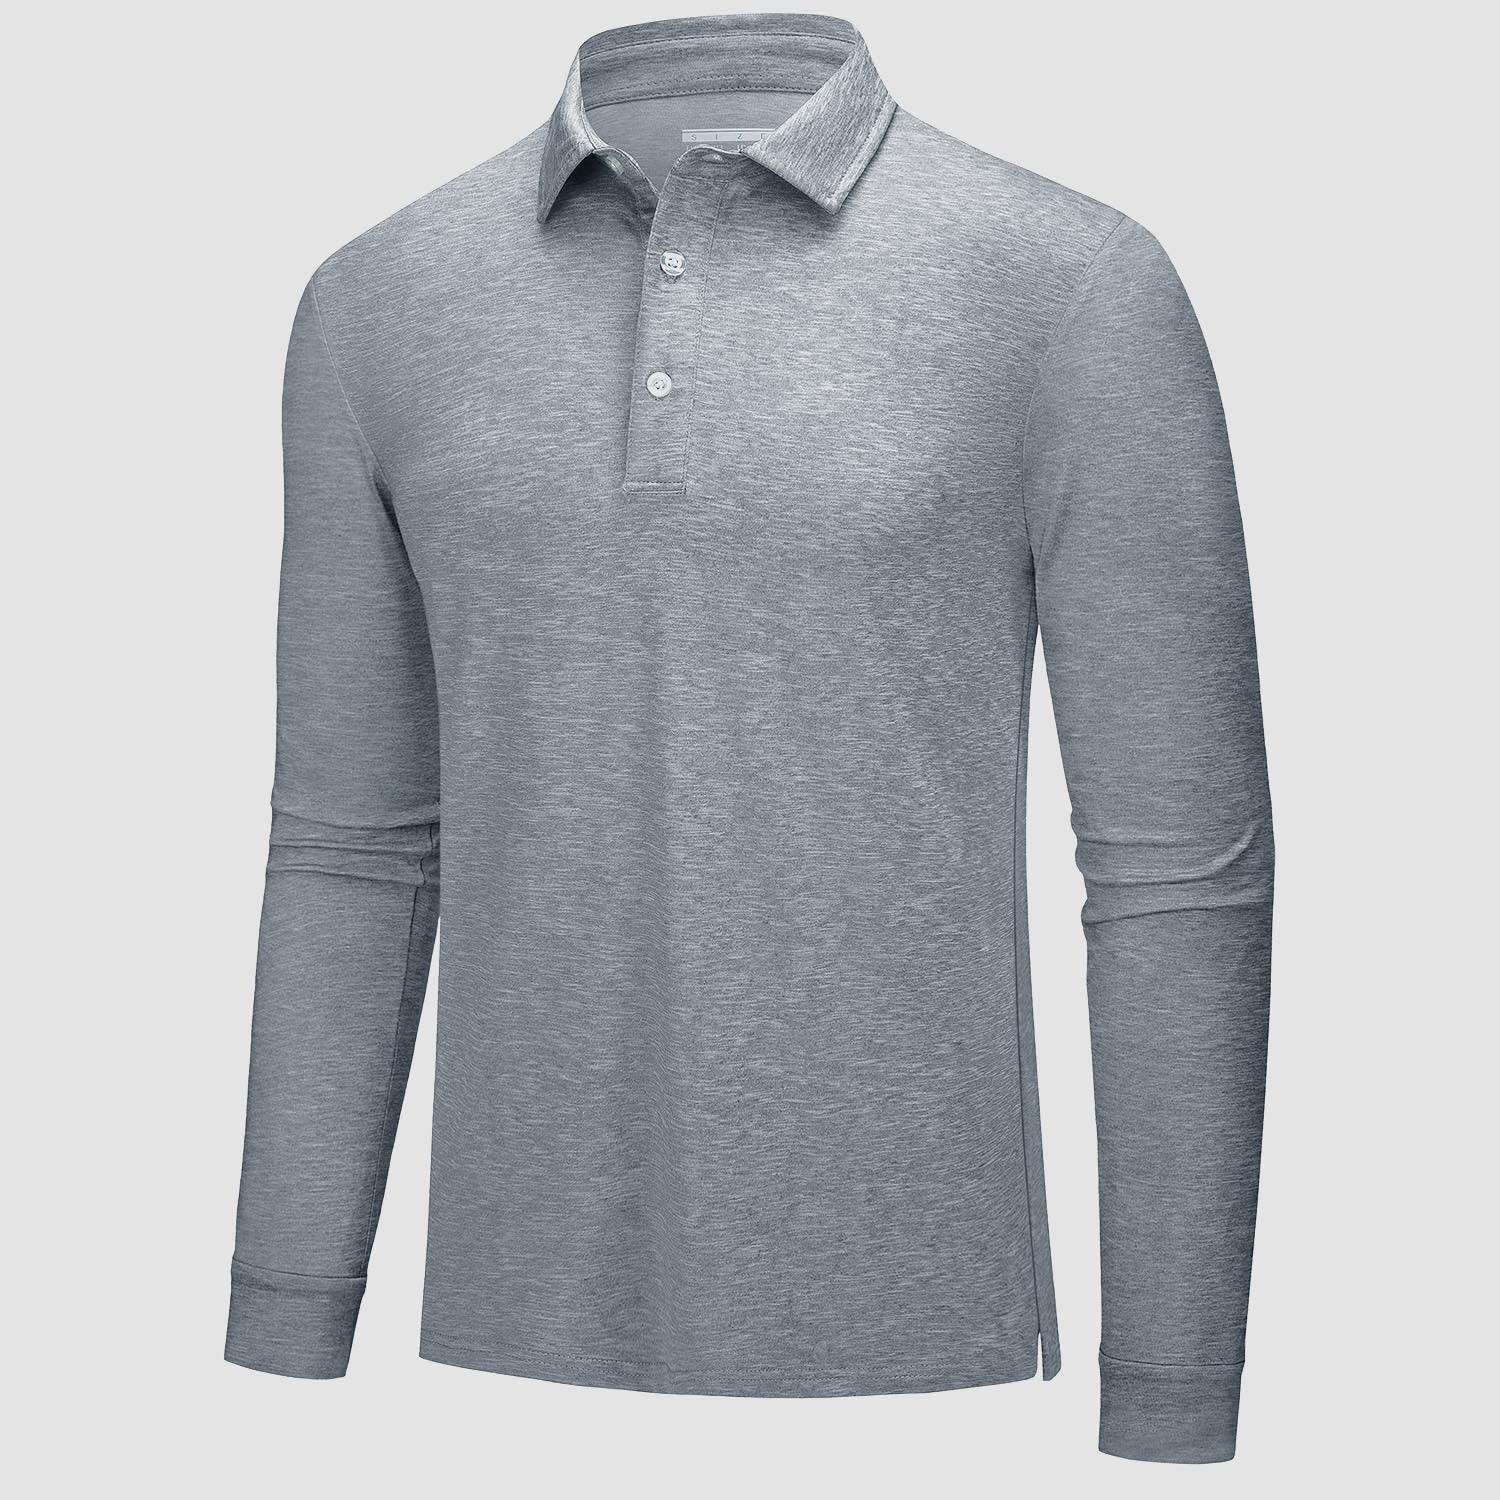 Men's Long Sleeve Polo Shirts 3 Buttons Collared Shirt Quick Dry Performance Golf Polo Tee Shirt